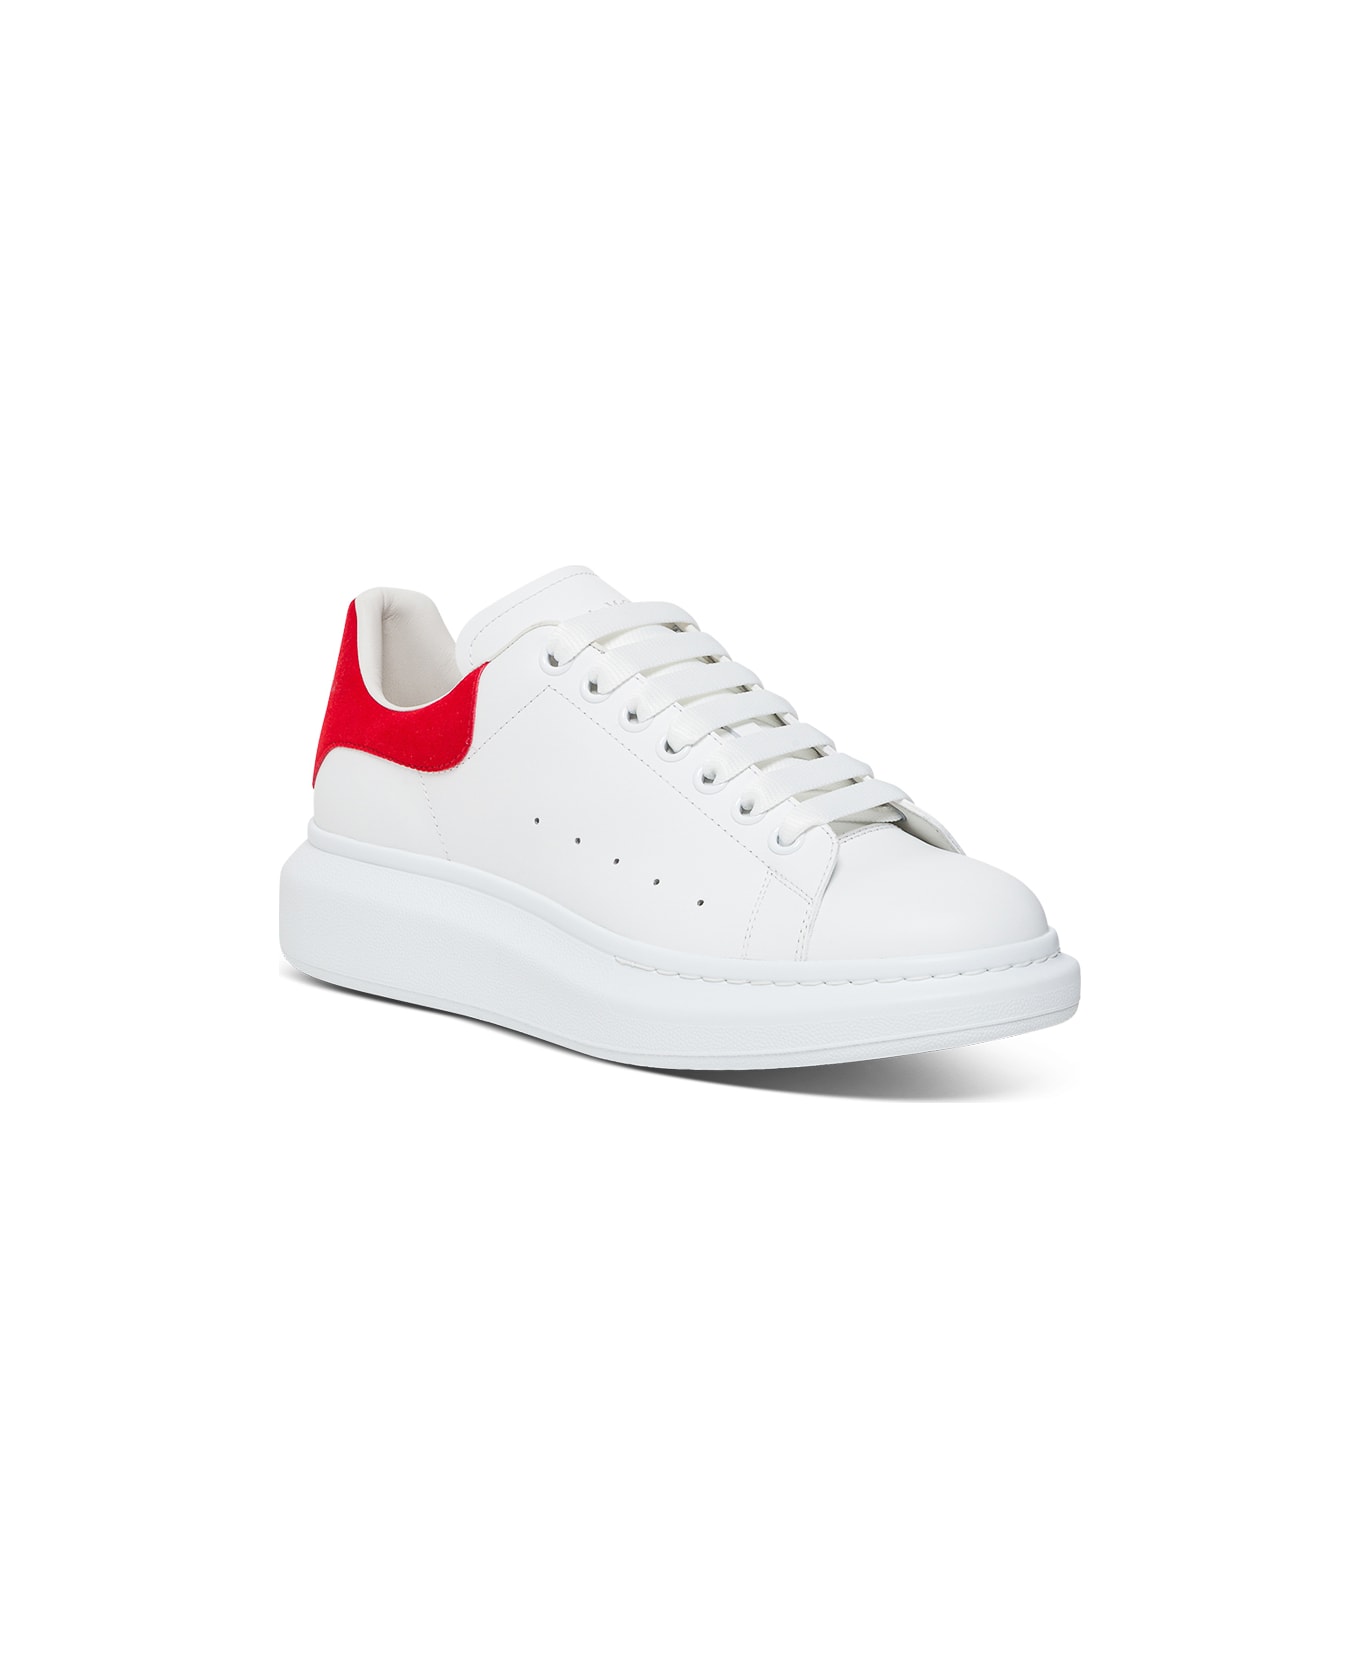 Alexander McQueen Man's Oversize White Leather And Red Heel Sneakers - White